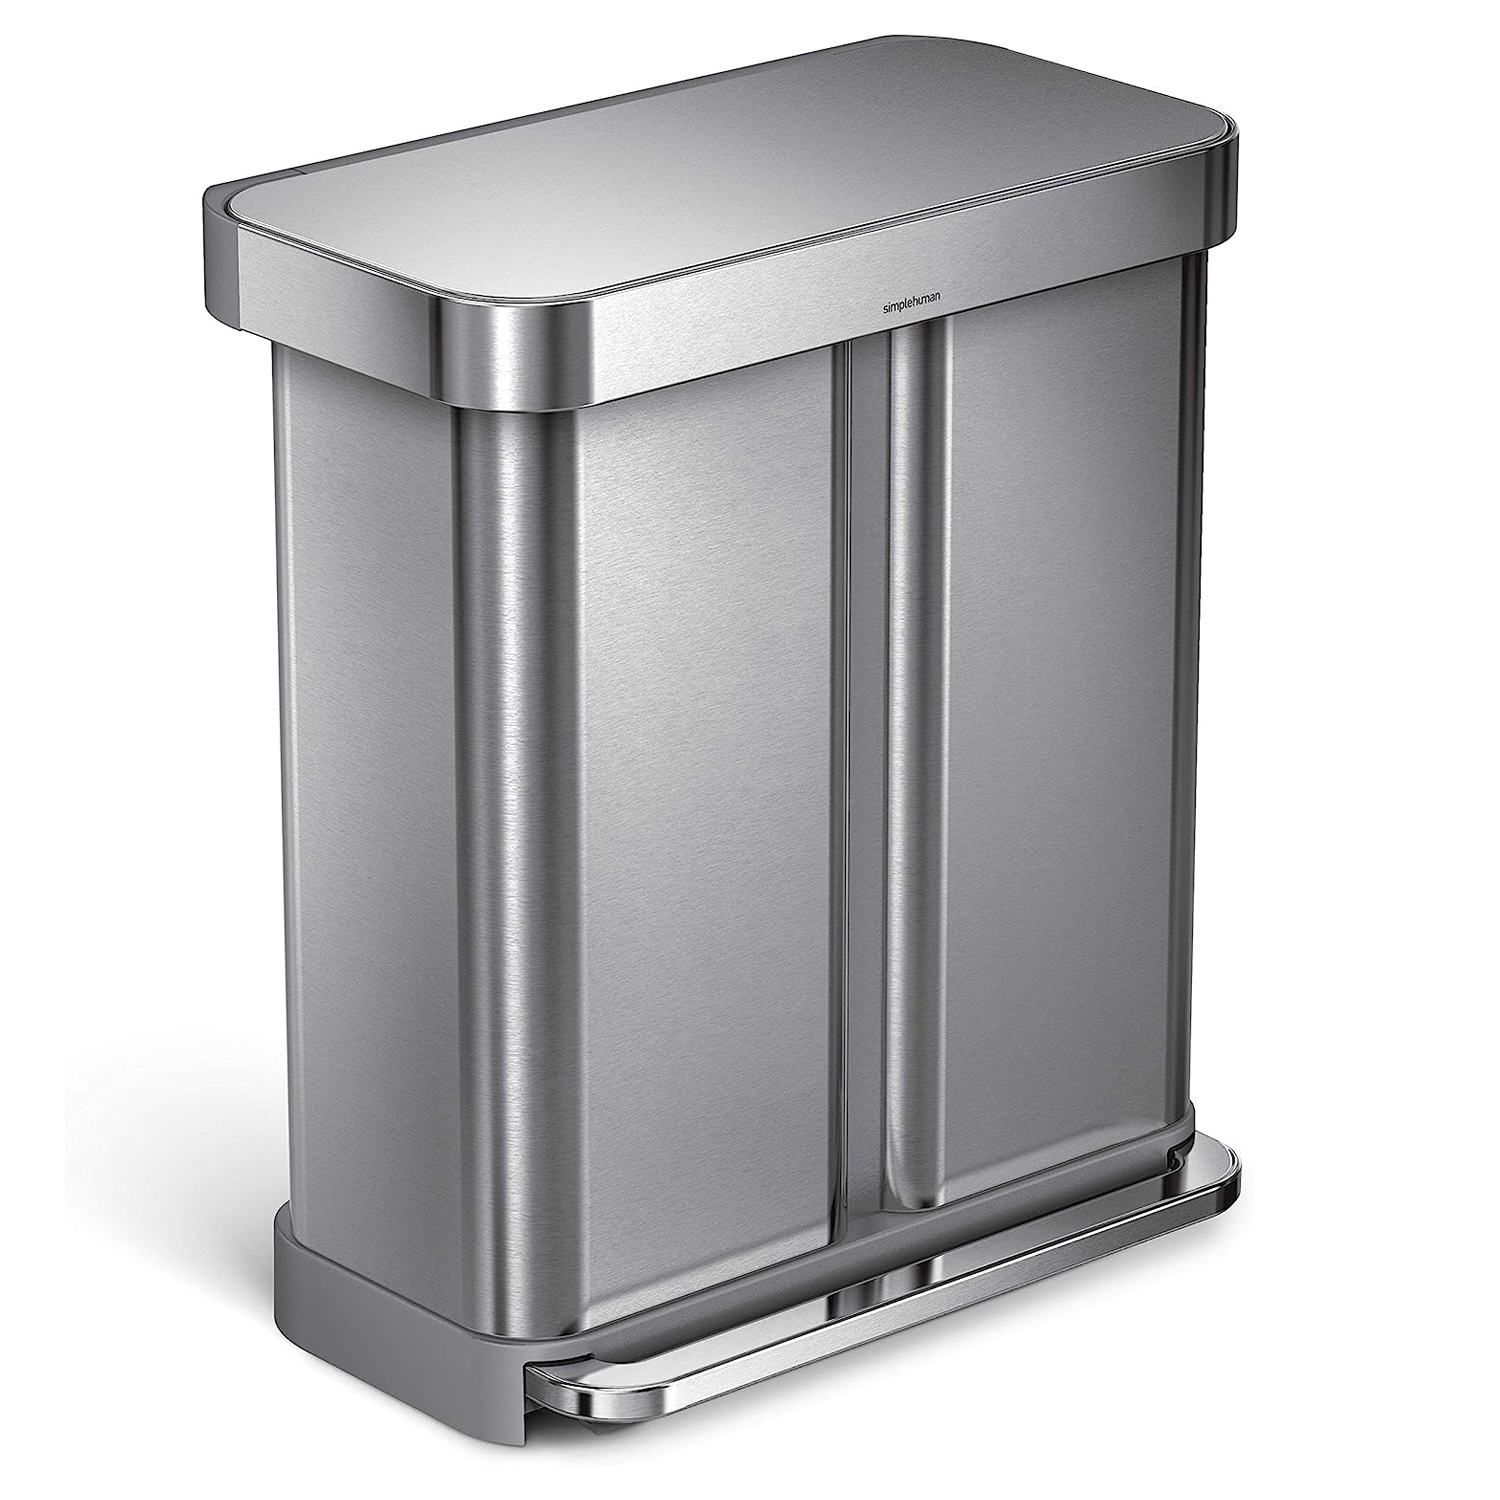 simplehuman 58 Liter : 15.3 Gallon Rectangular Hands-Free Dual Compartment Recycling Kitchen Step Trash Can